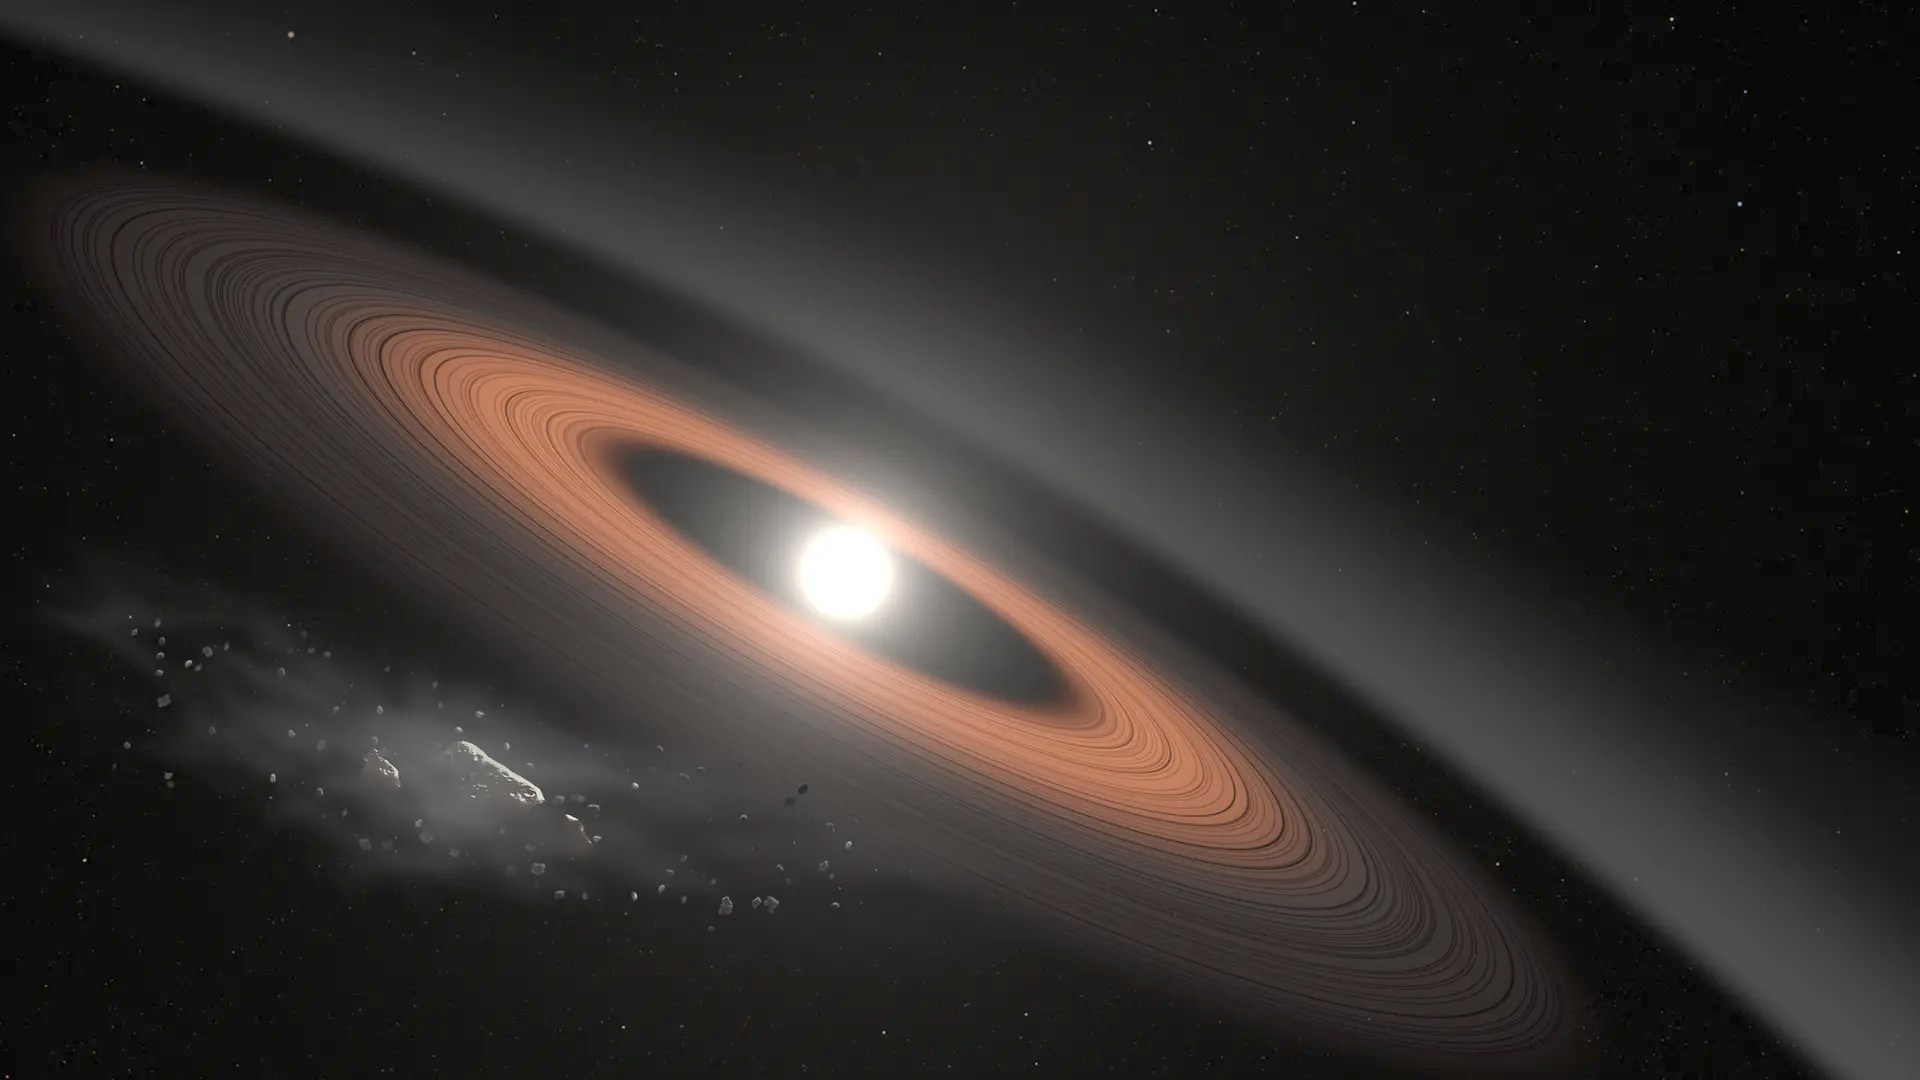 Artist's concept of a white dwarf system